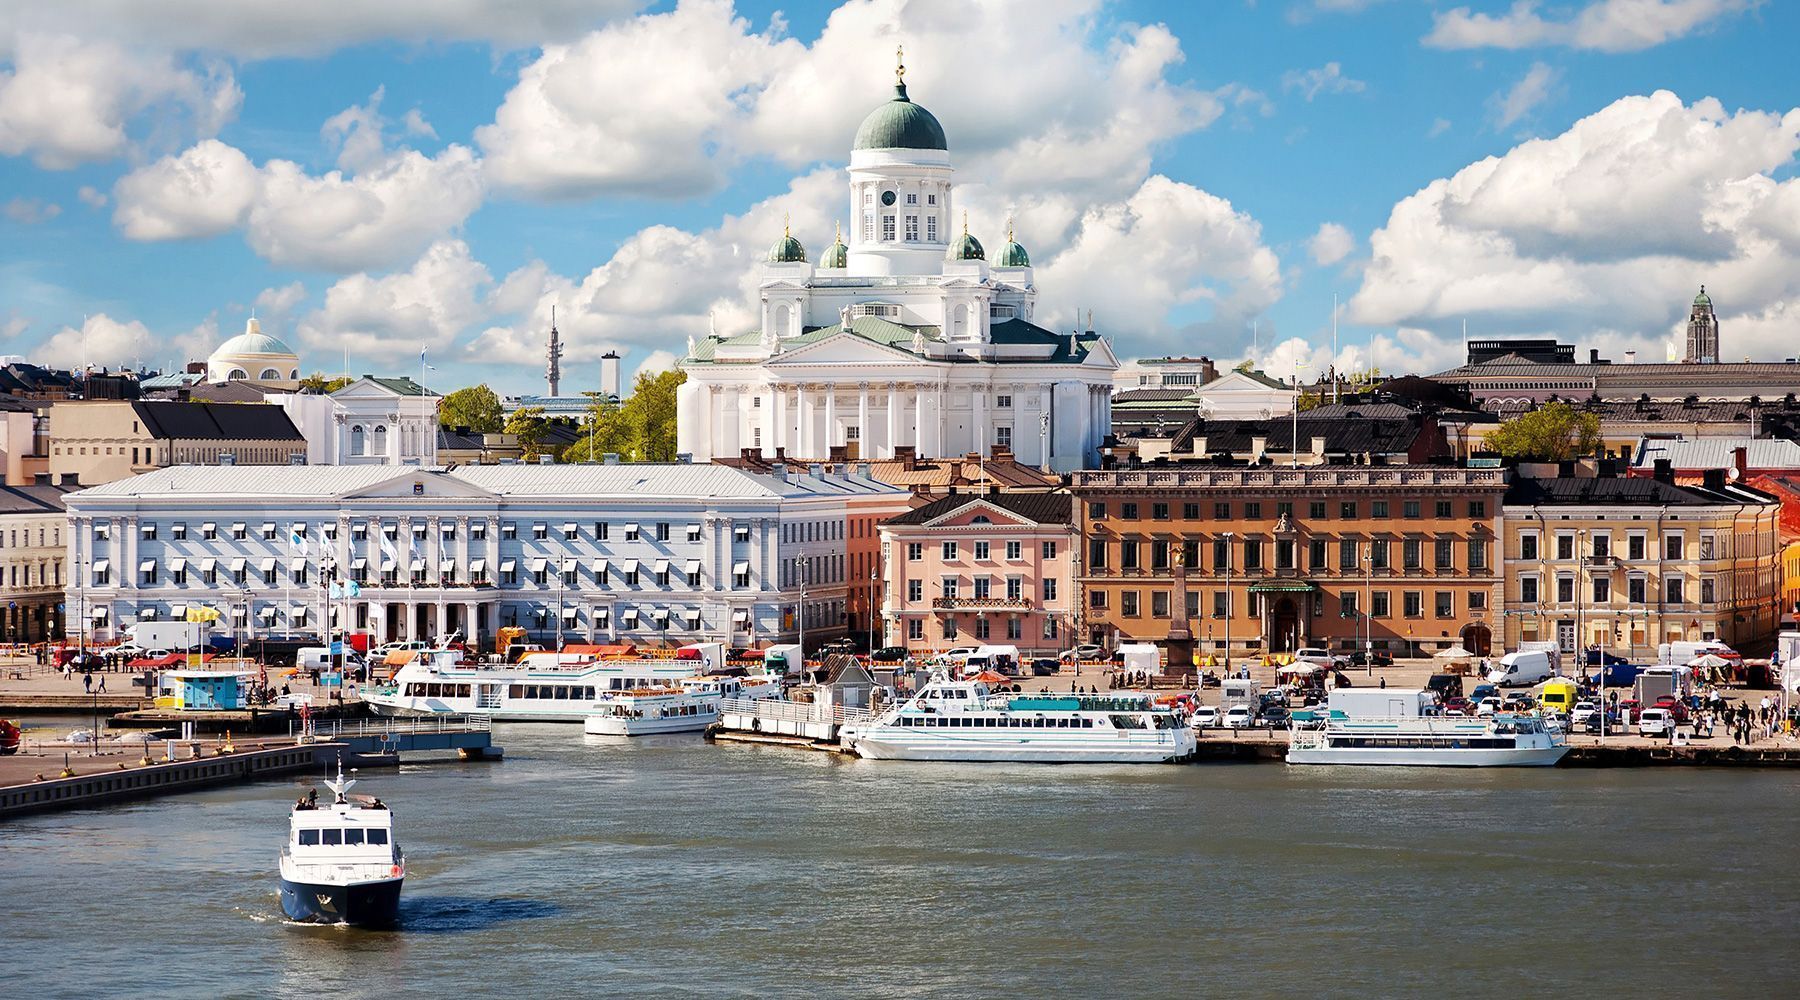 Visit Helsinki for a green-urban experience - Inside Recent